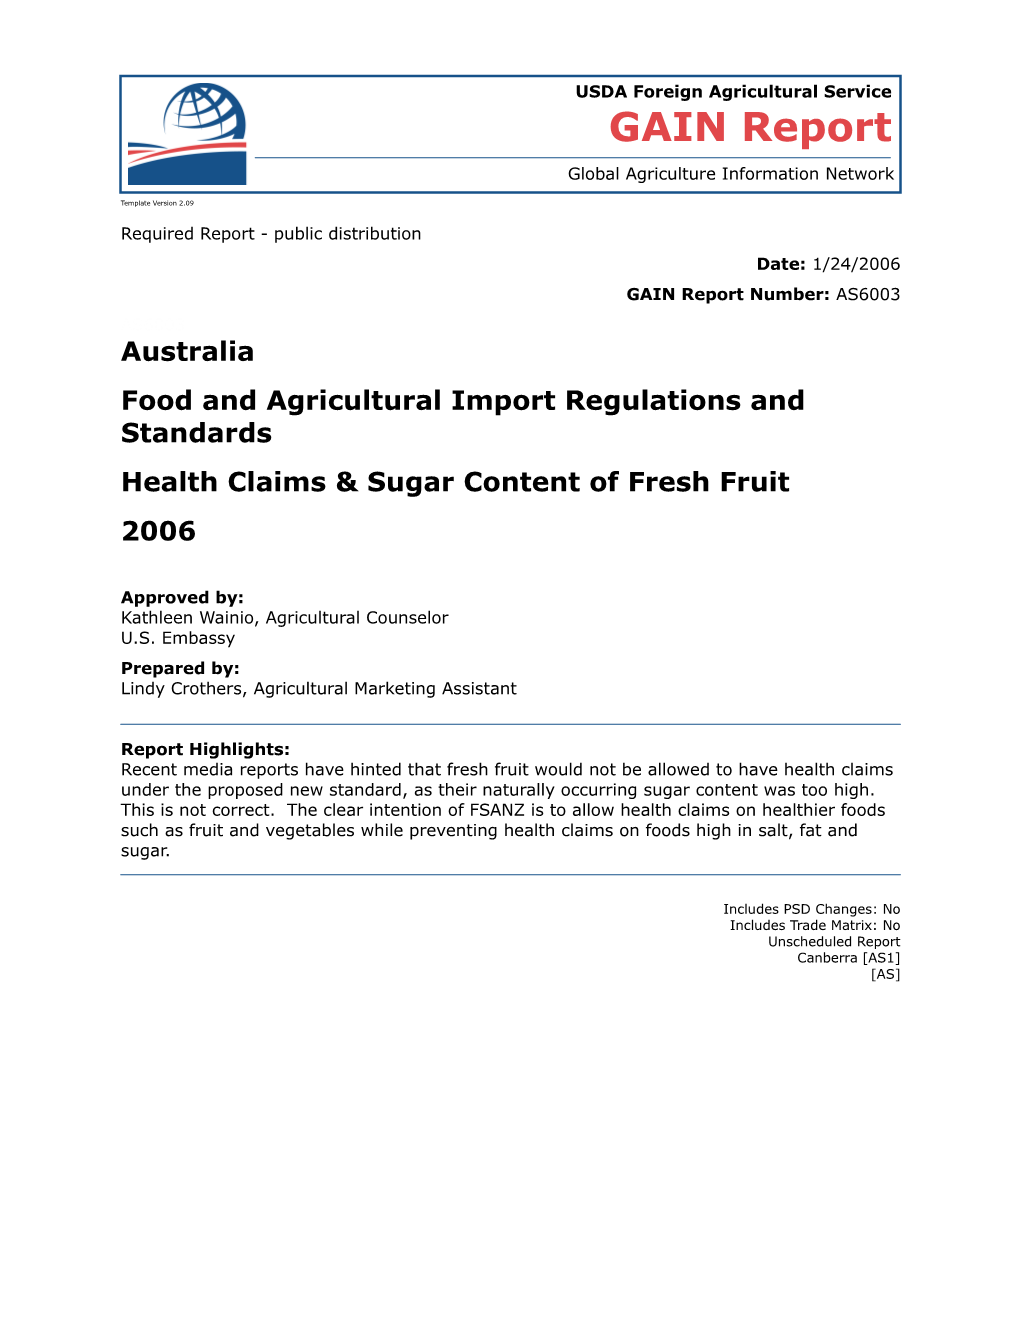 Food and Agricultural Import Regulations and Standards s20